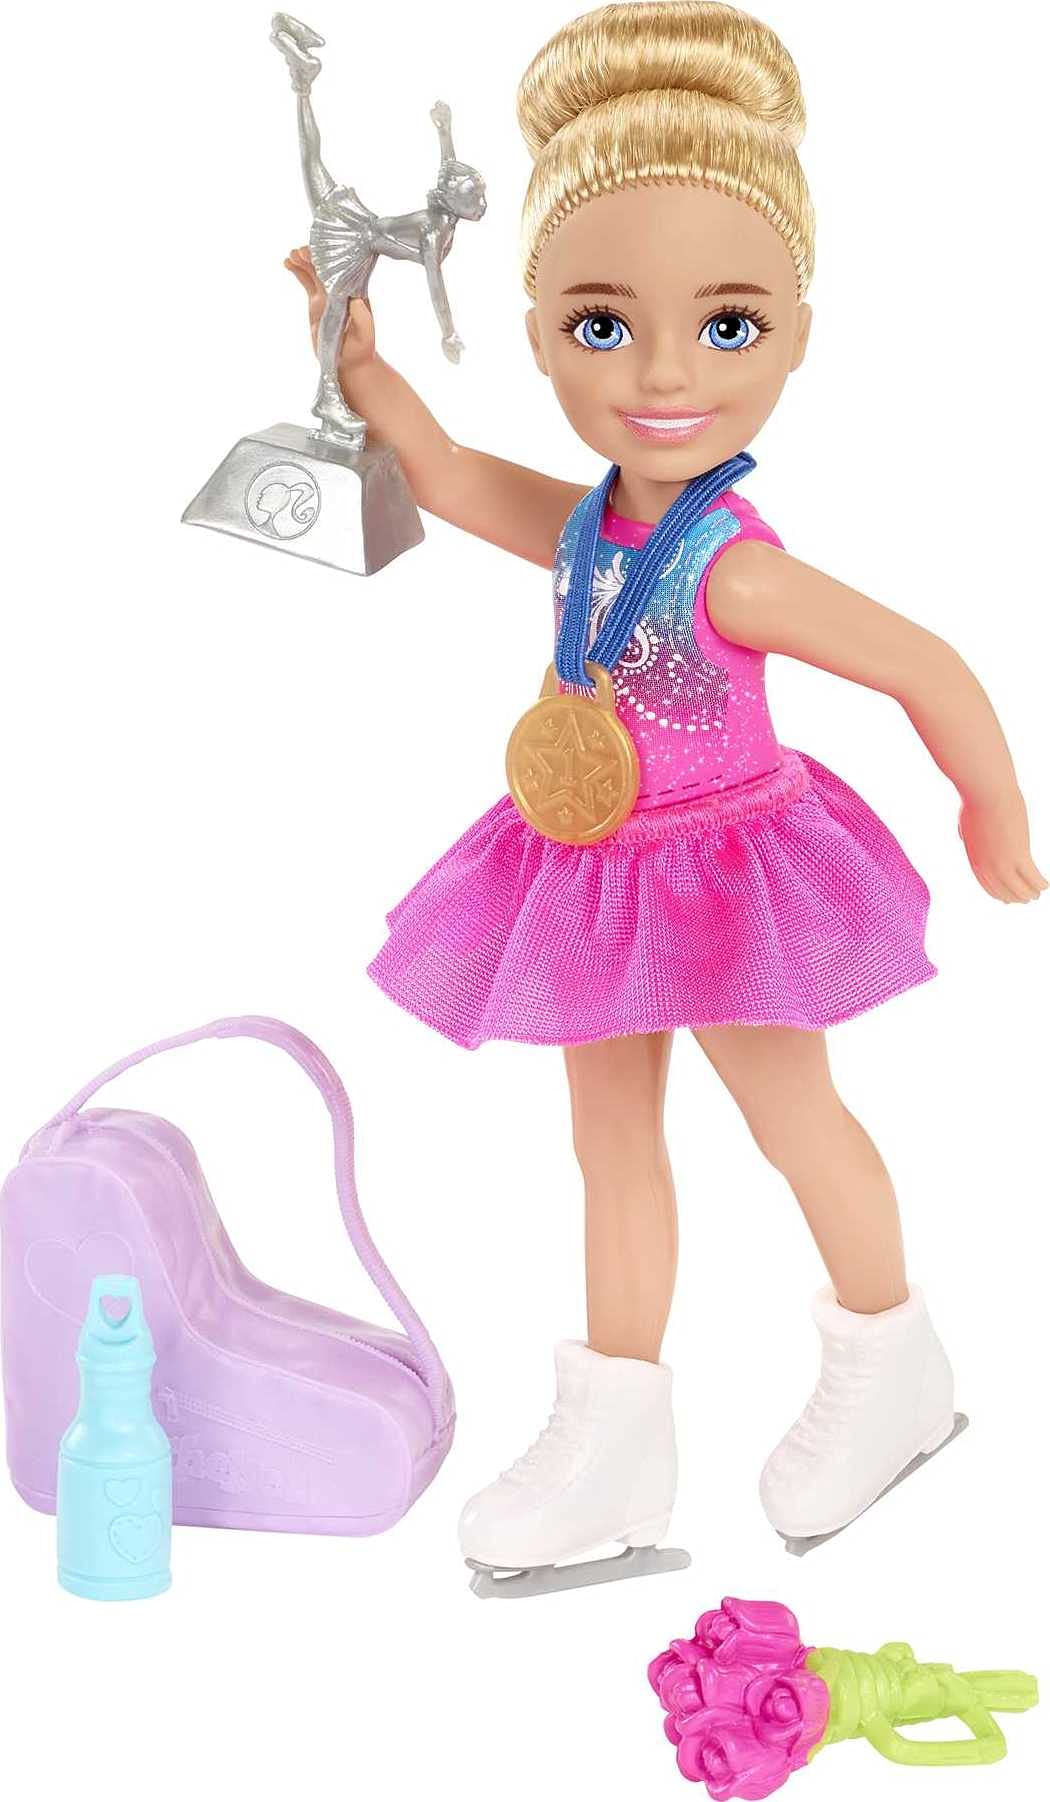 Barbie Chelsea Can Be Doll & Playset, Blonde Ice Skater Small Doll with Removable Outfit & 6 Career Accessories